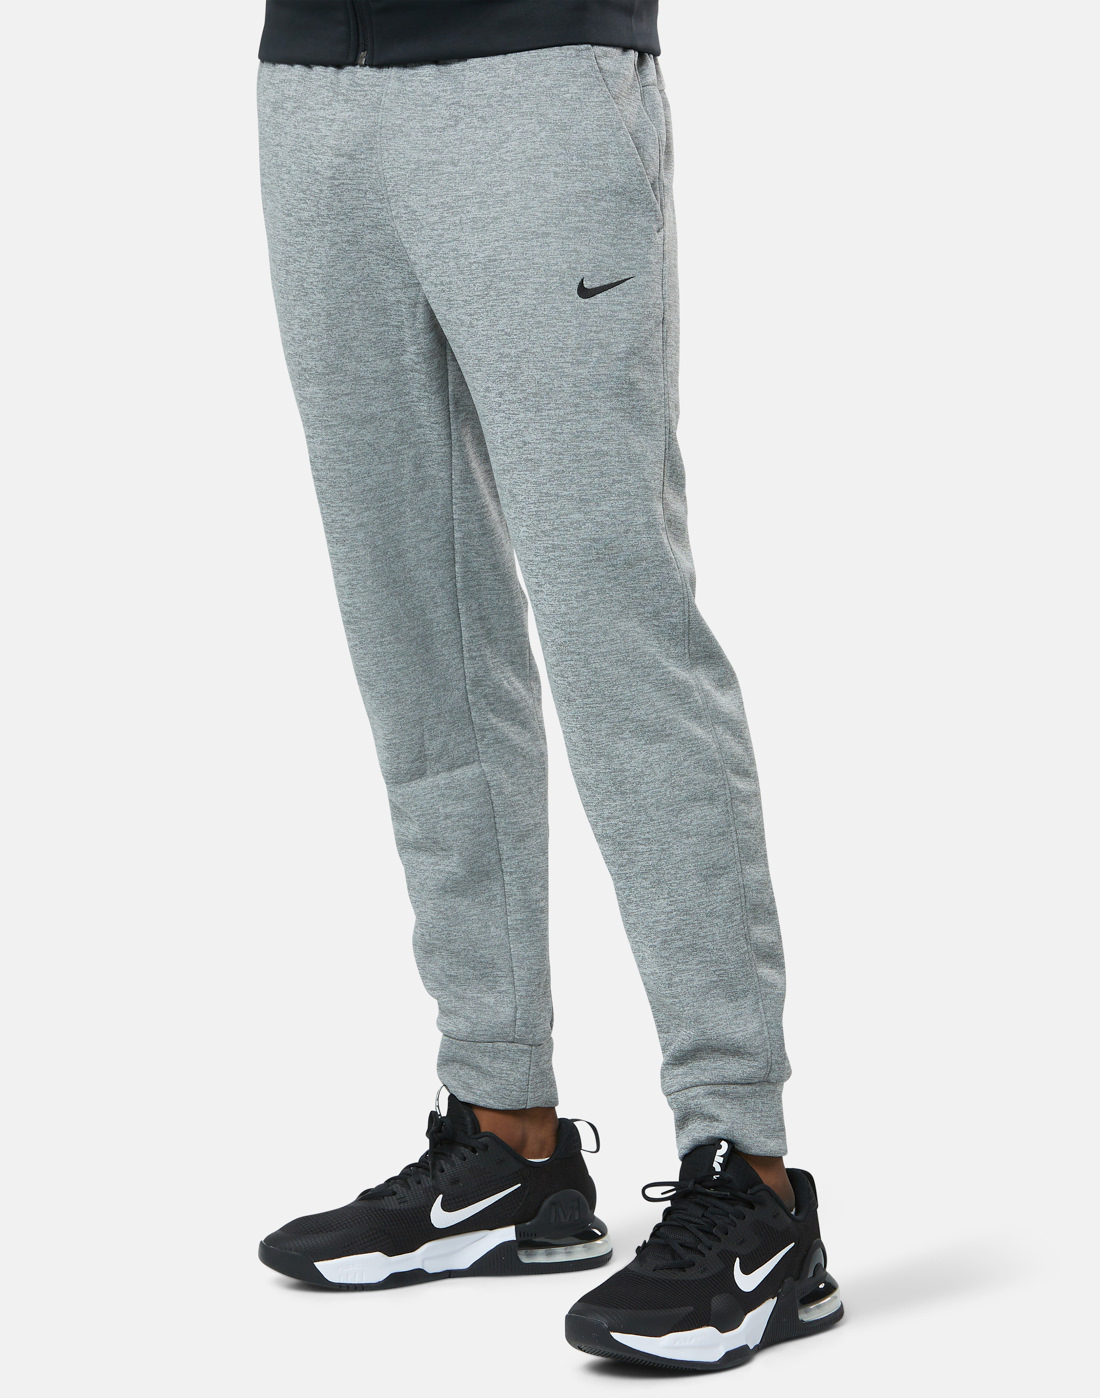 Nike Mens Therma Fleece Taper Pants - Grey | Life Style Sports IE